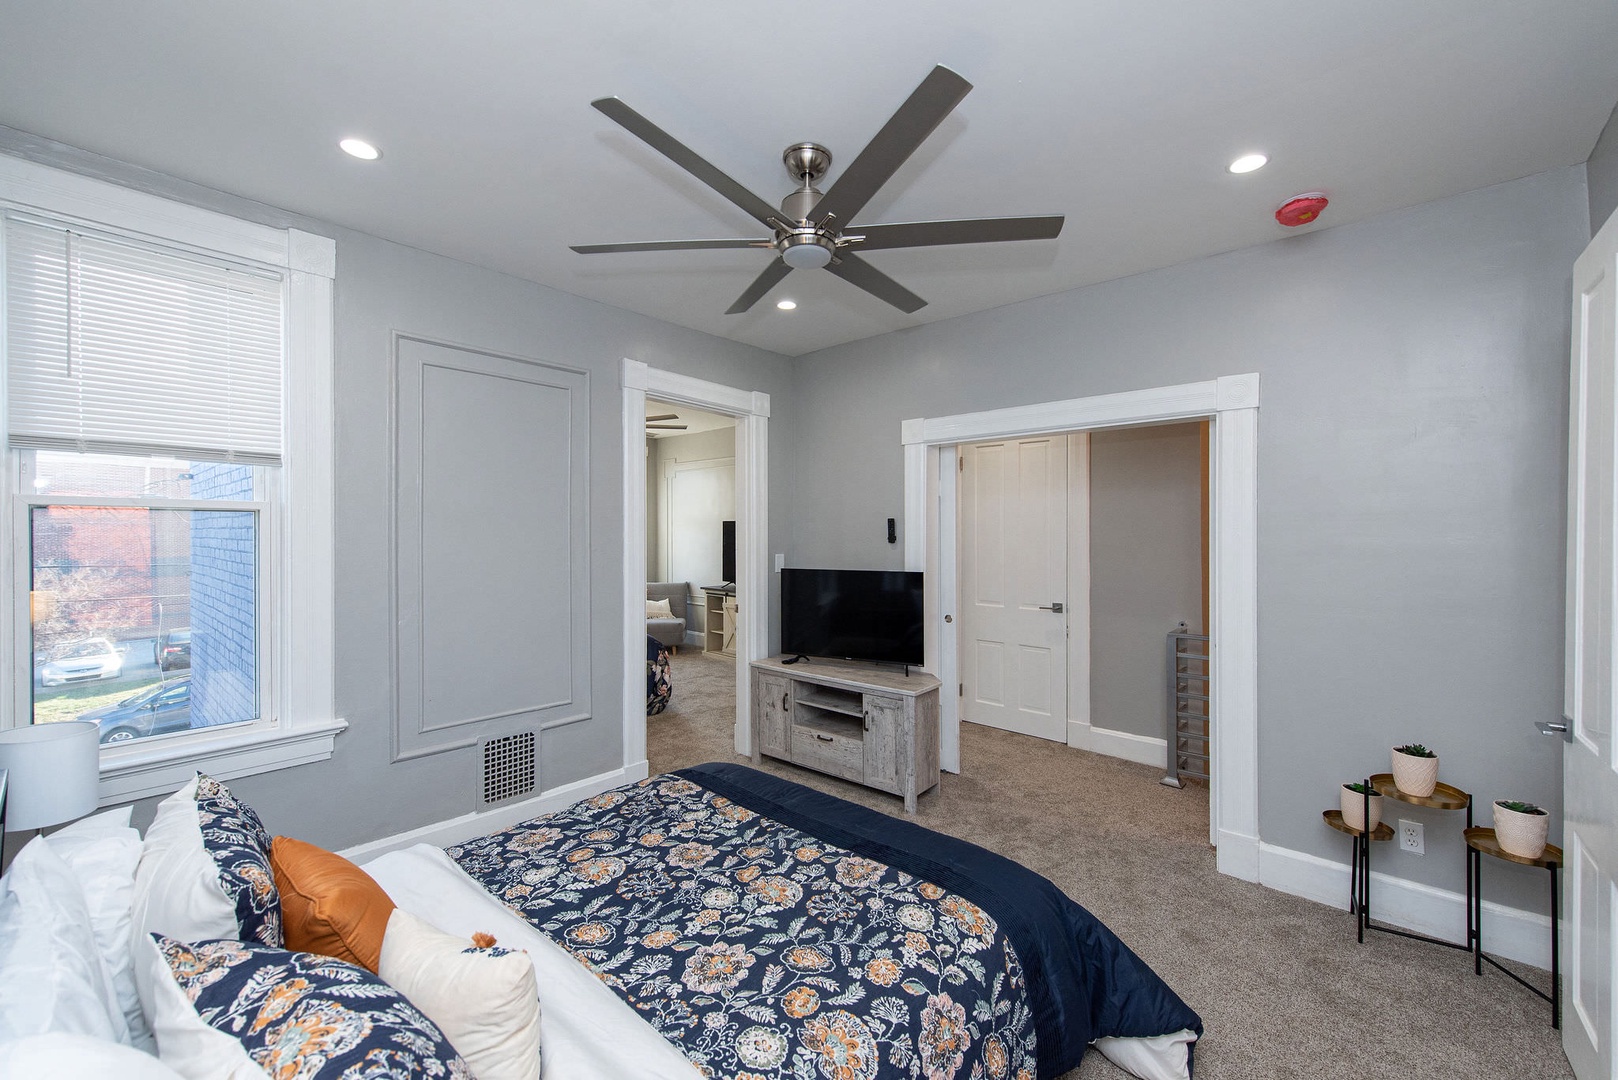 Suite 2 – The 2nd of 3 bedrooms includes a queen bed, Smart TV, & ceiling fan